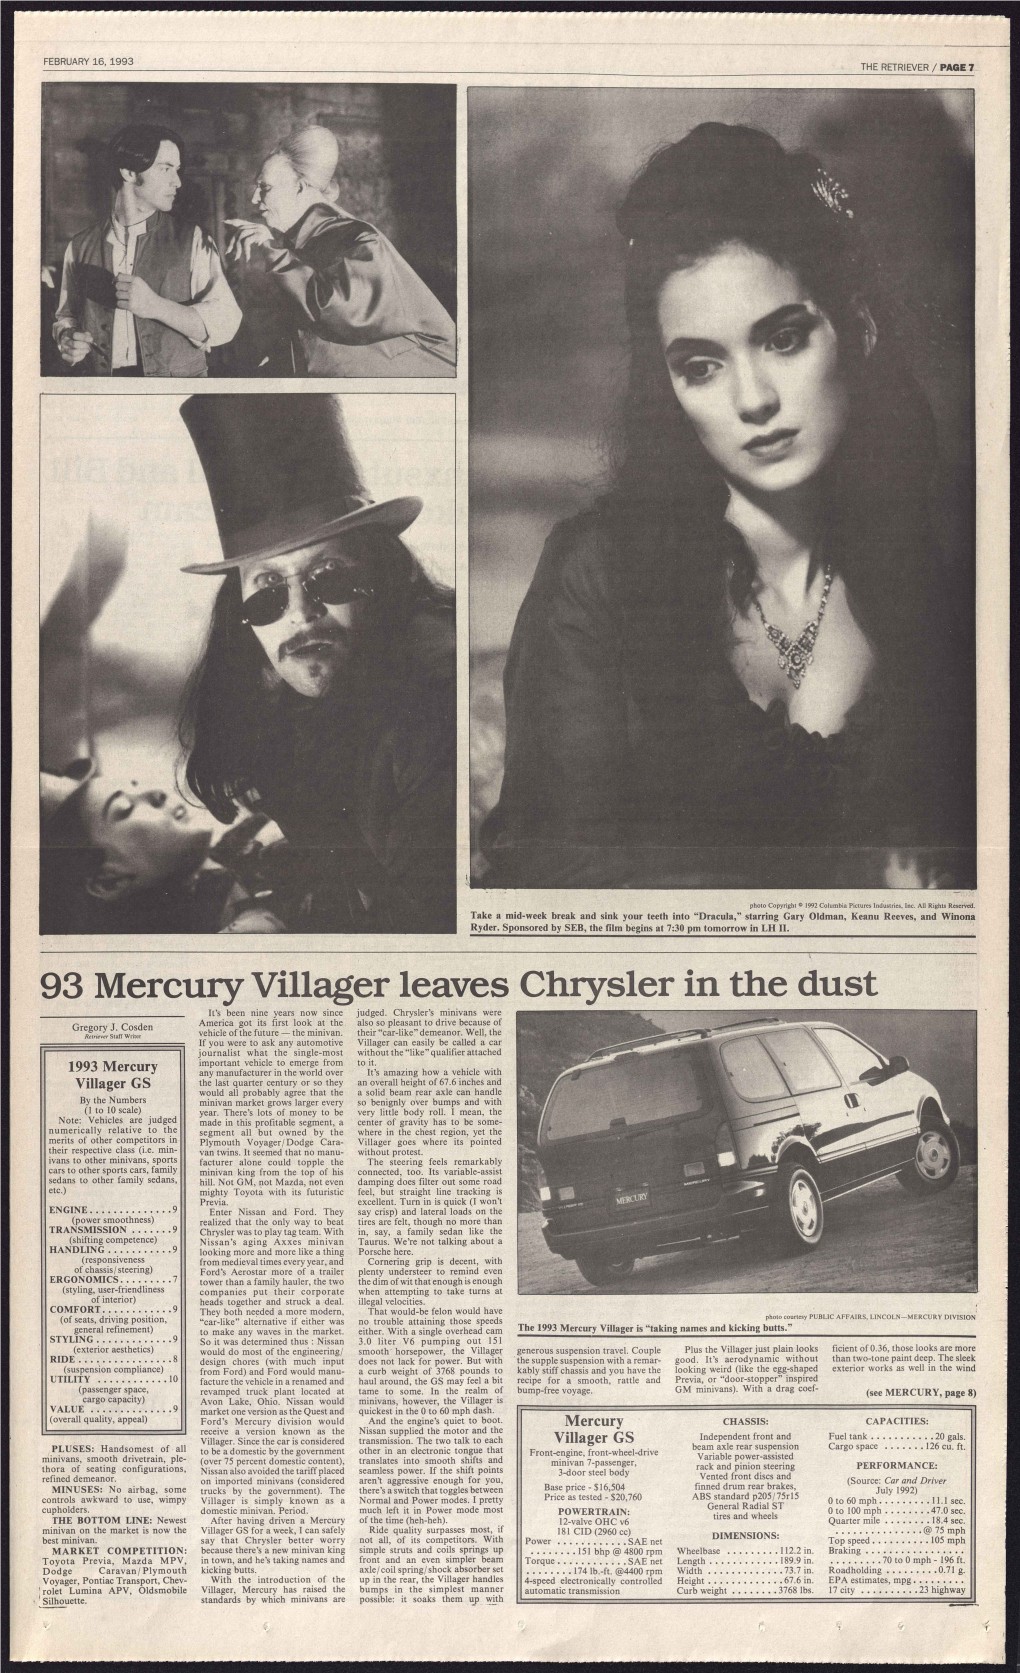 93 Mercury Villager Leaves Chrysler in the Dust It's Been Nine Years Now Since Judged